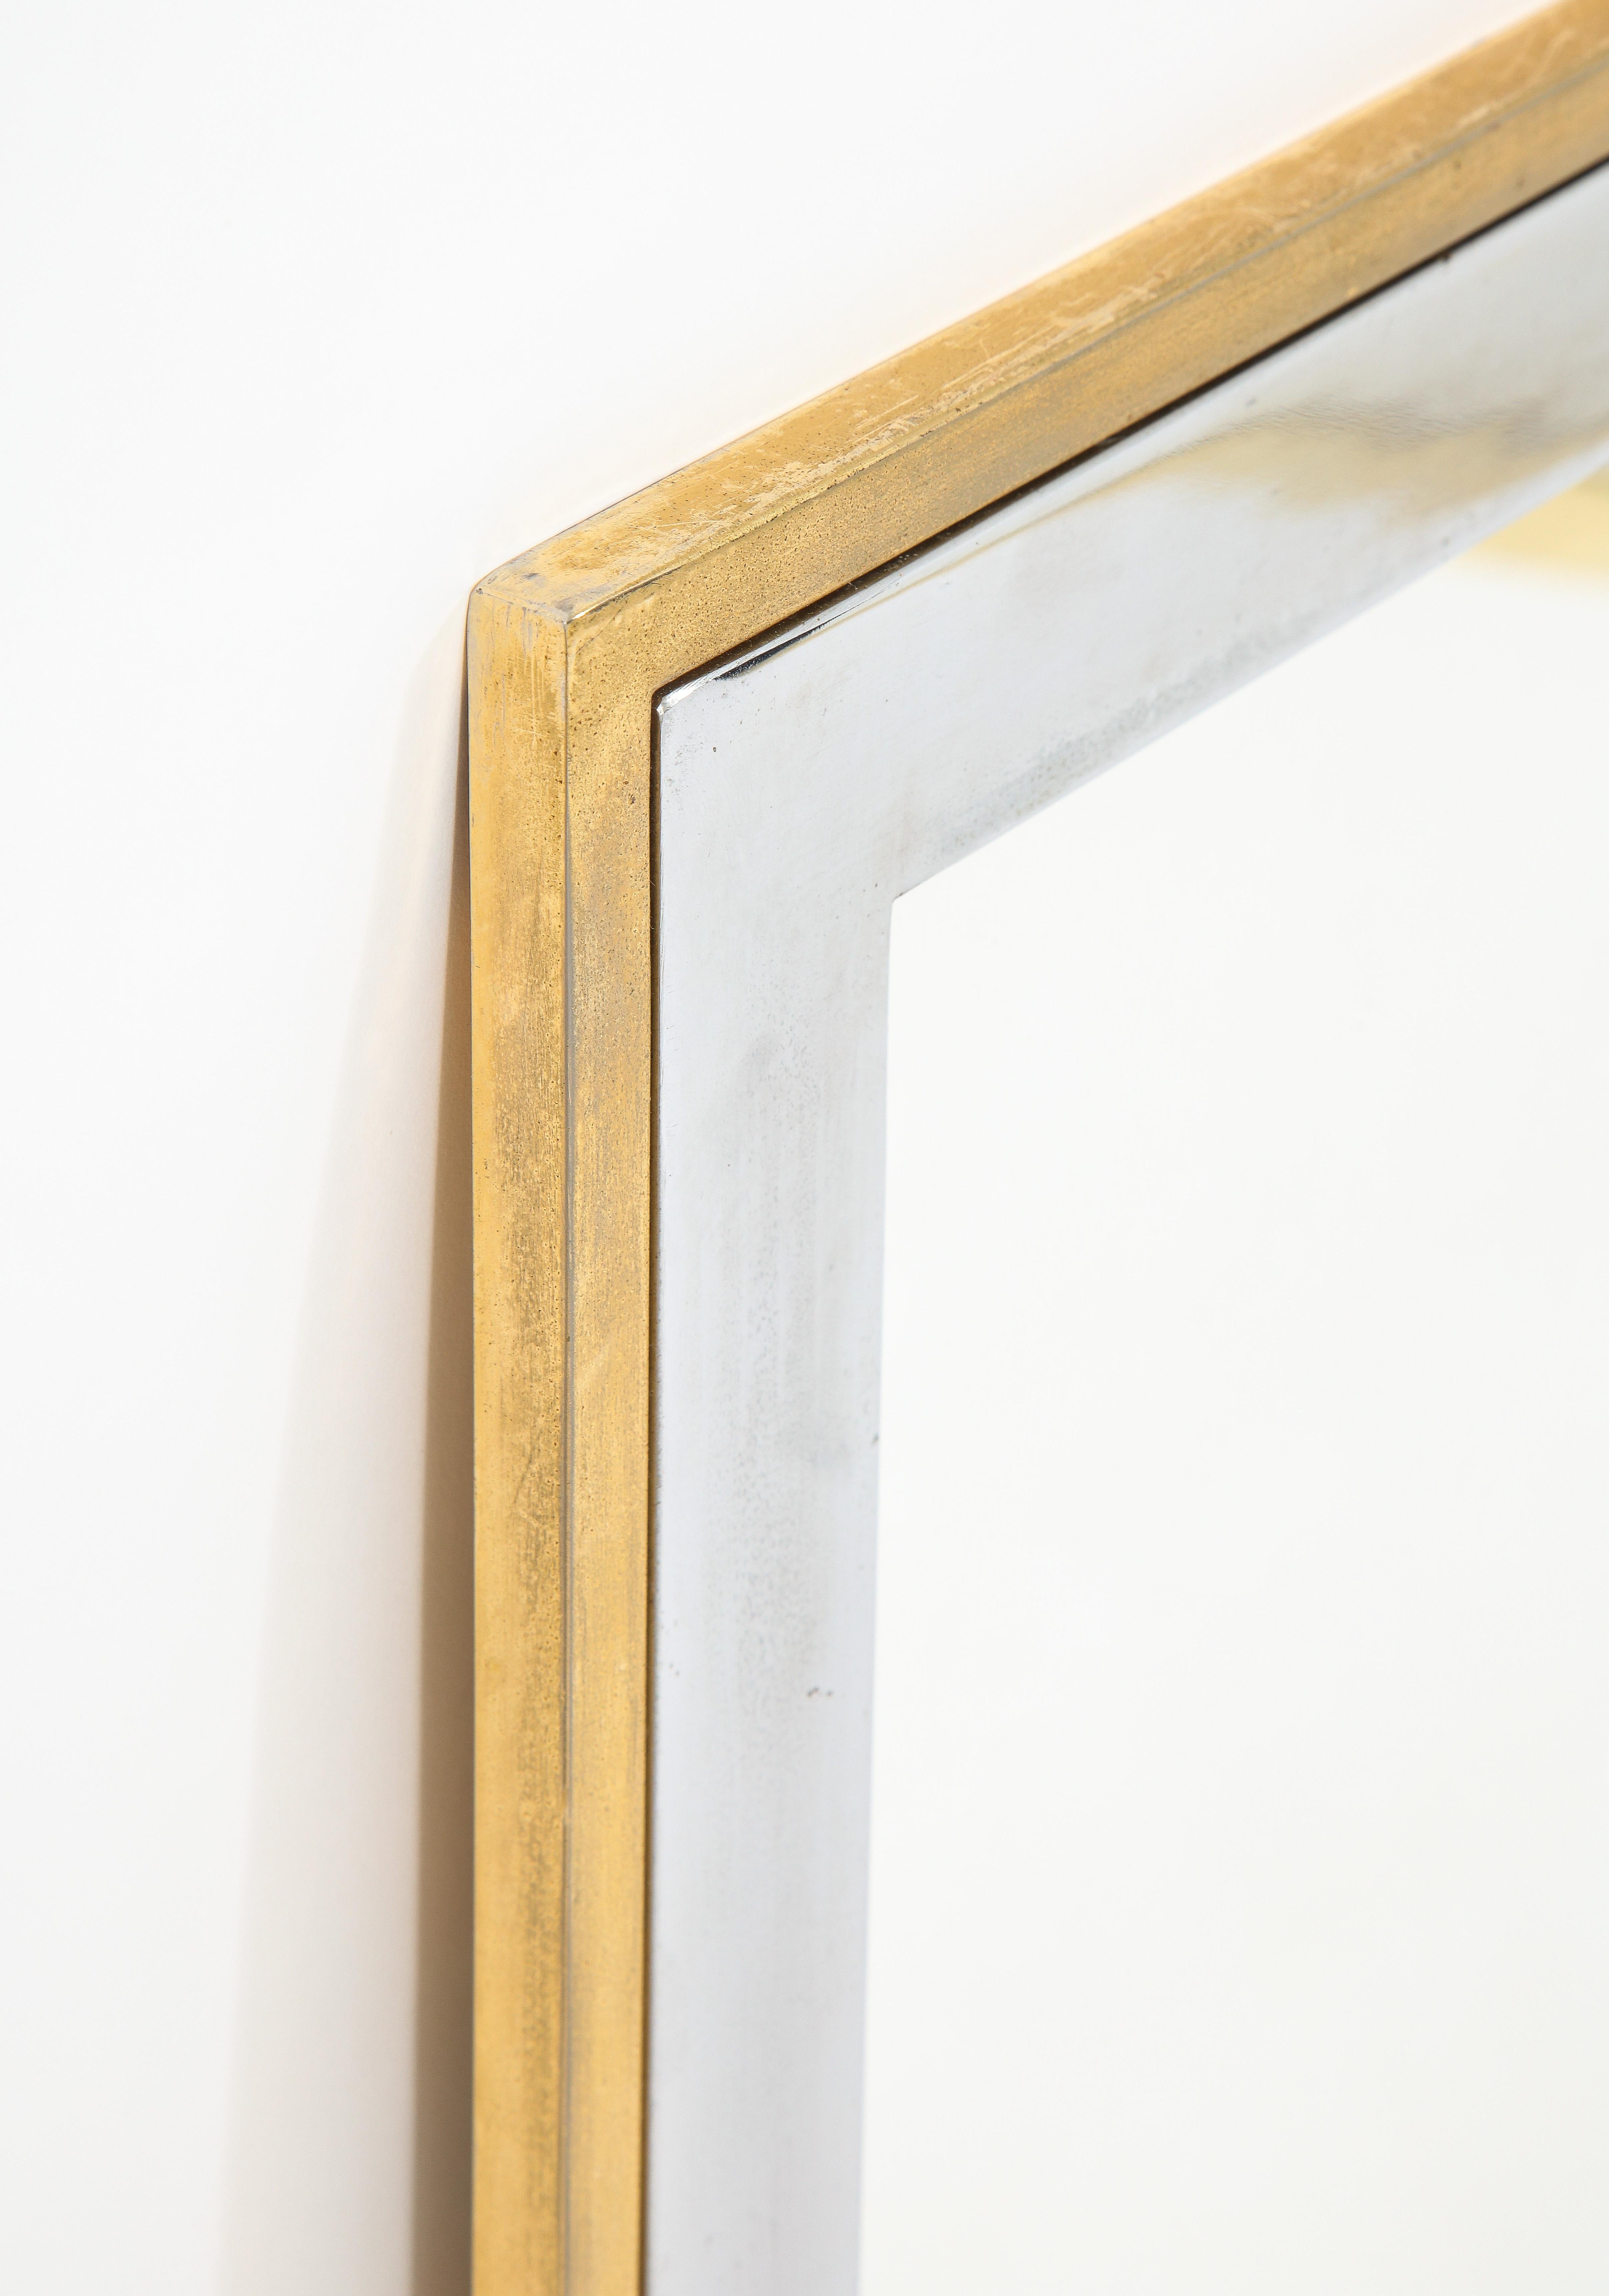 Nickel and Brass Rectangular Mixed Metal Mirror, France 1960's For Sale 3